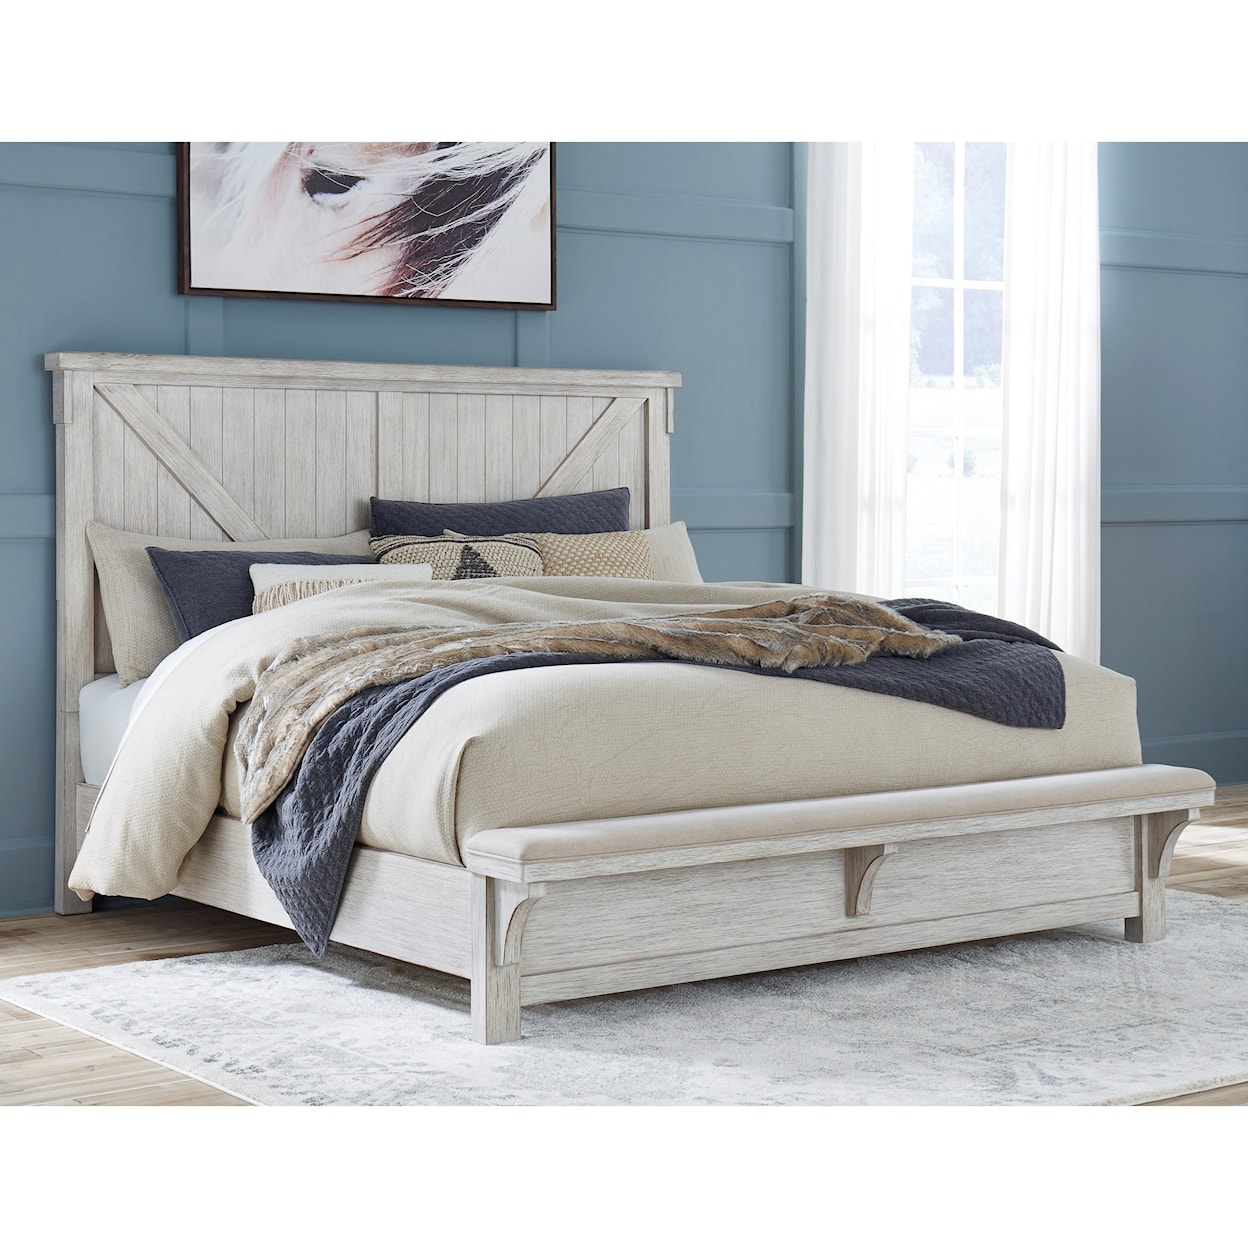 Signature Design by Ashley Brashland Calfornia King Bed with Footboard Bench